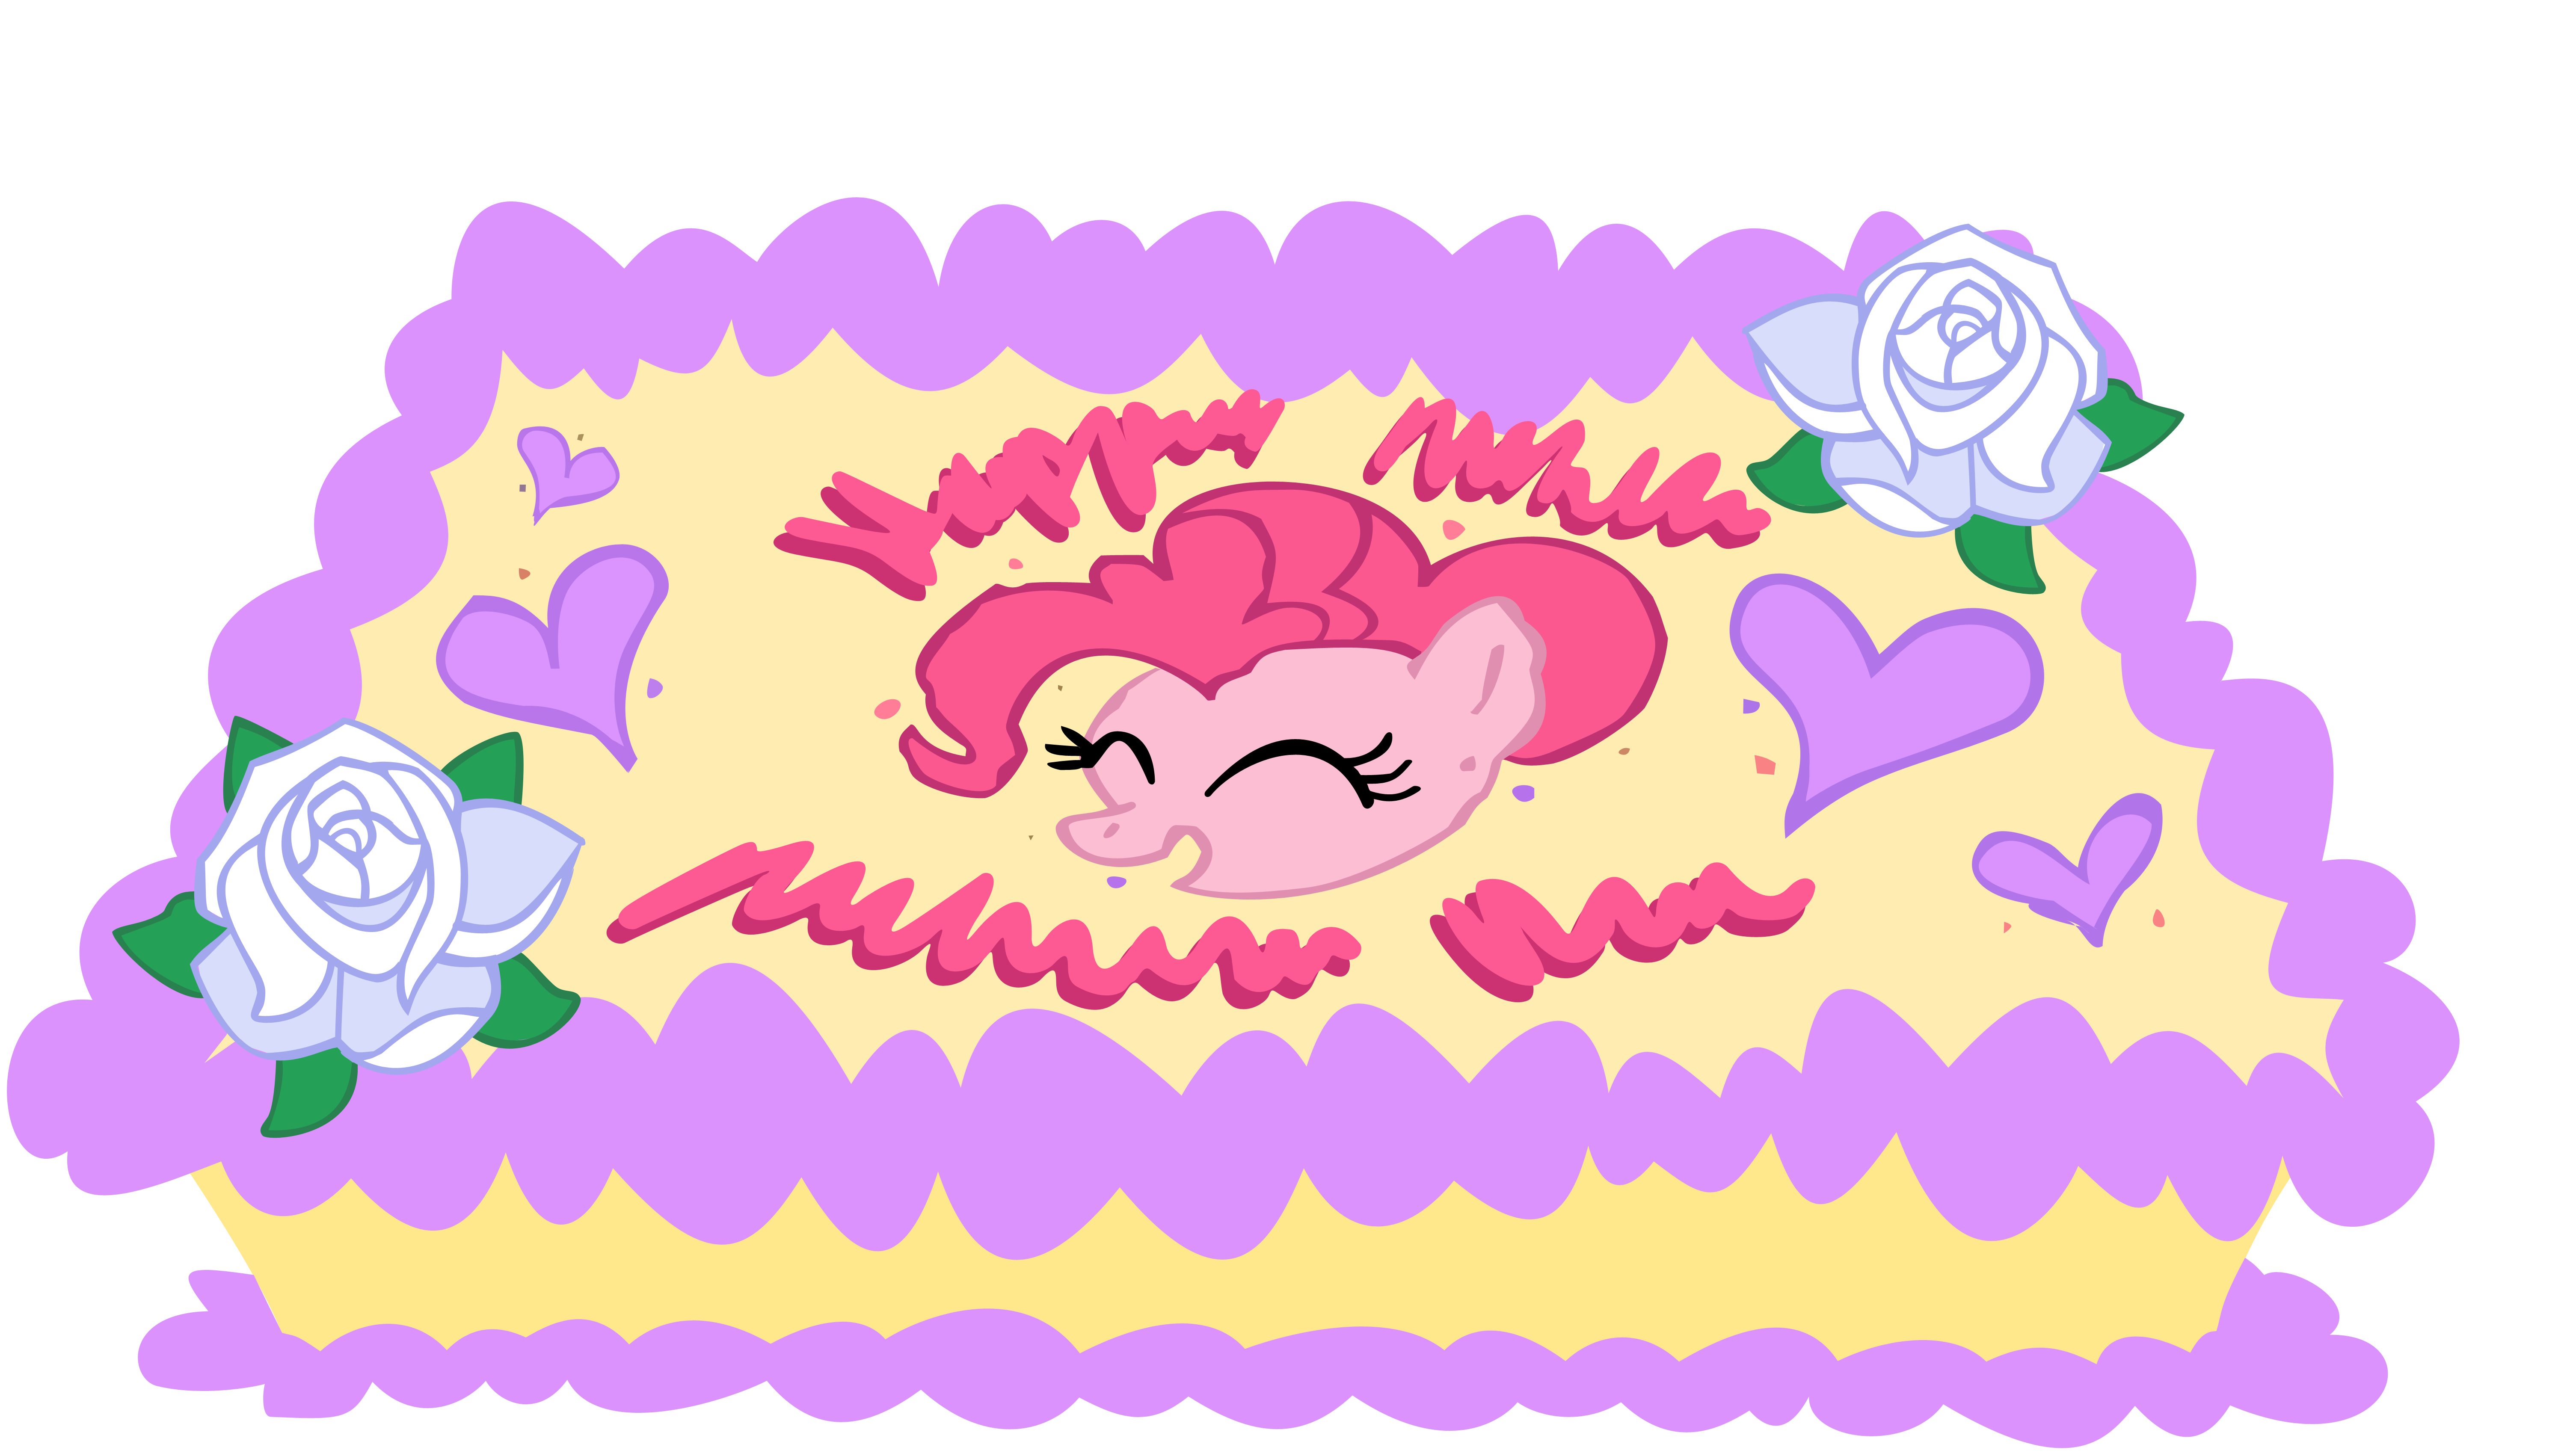 Image of Pinkie Pie's birthday cake from the episode "Party of One"